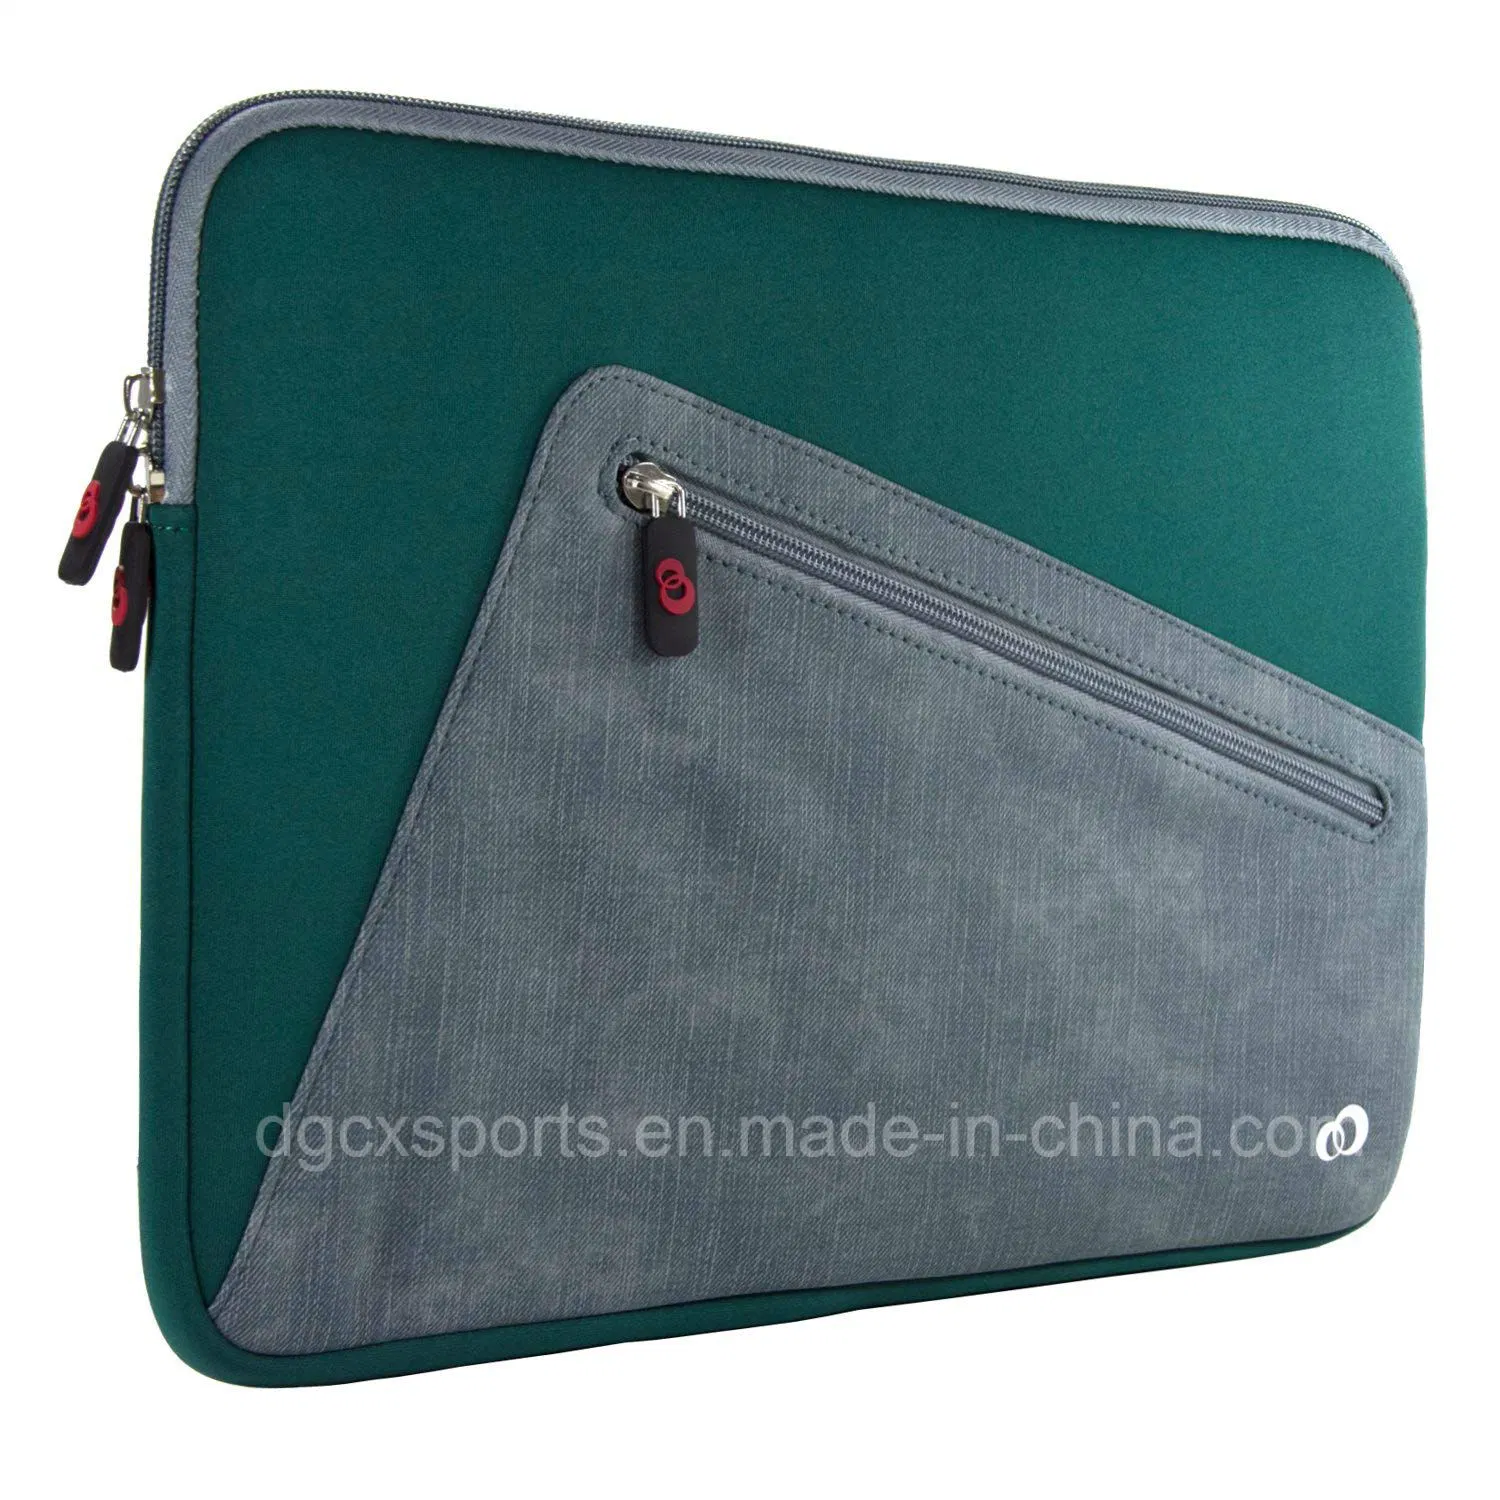 360 Water Resistant PC Cover Case for MacBook PRO